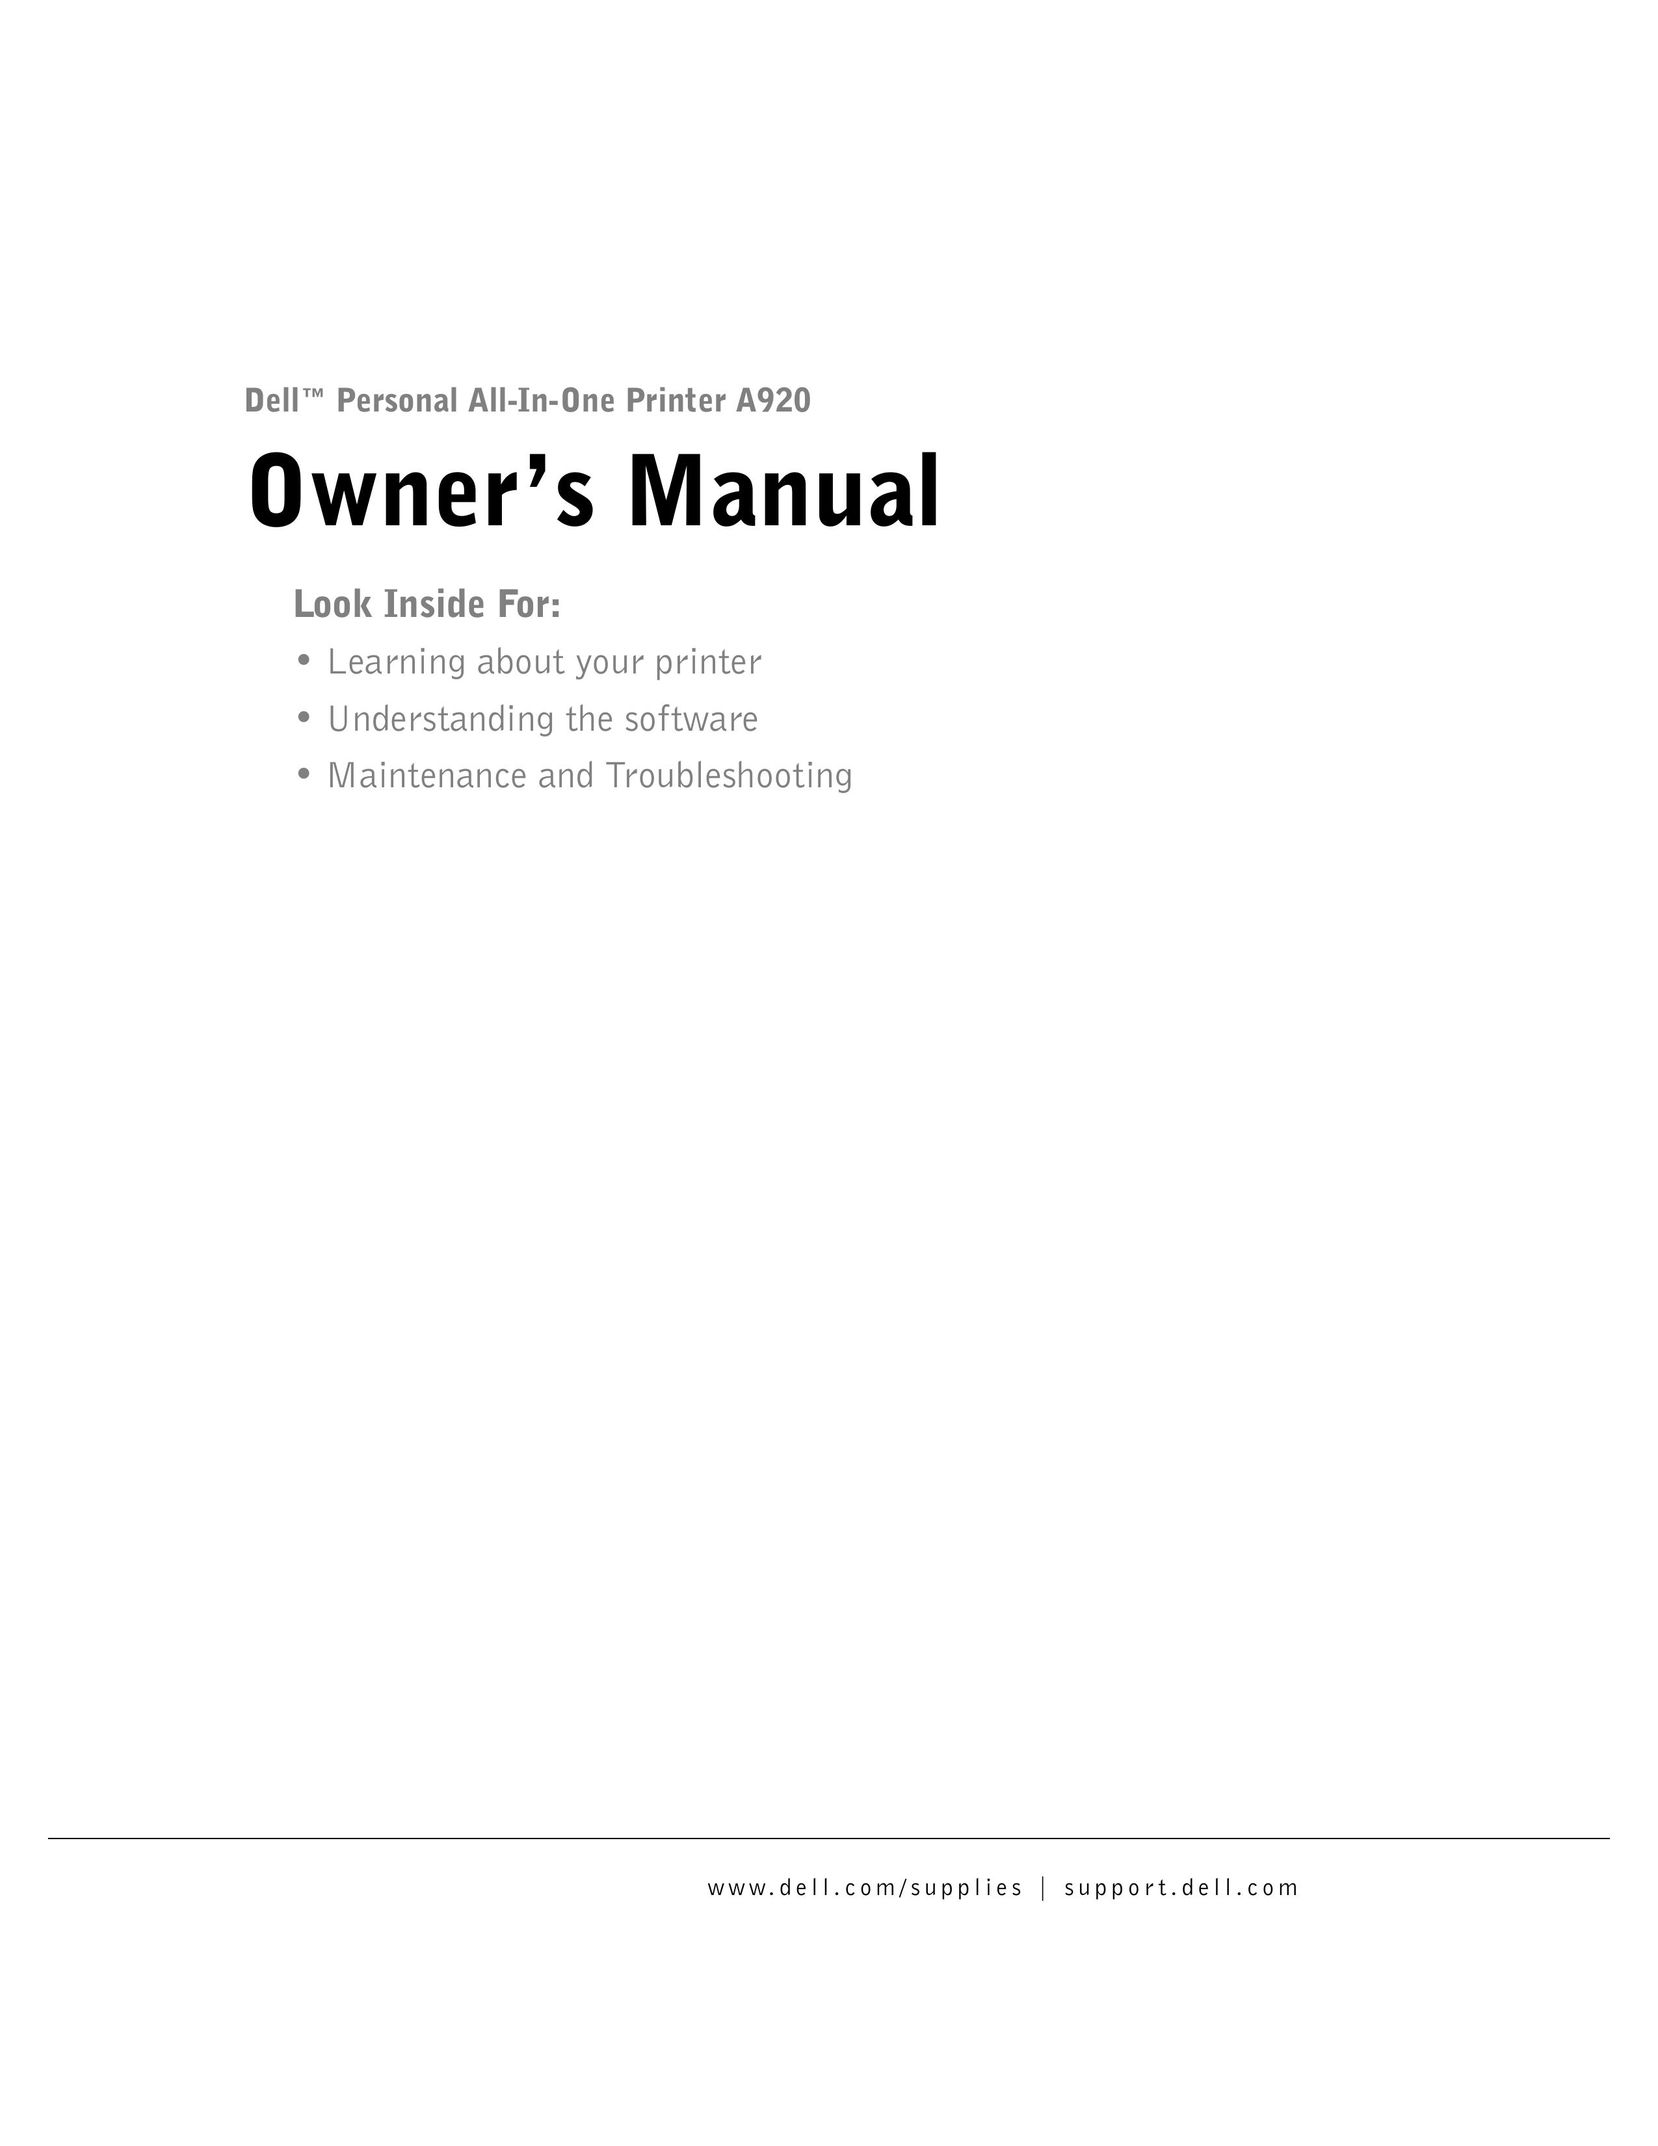 Dell A920 All in One Printer User Manual